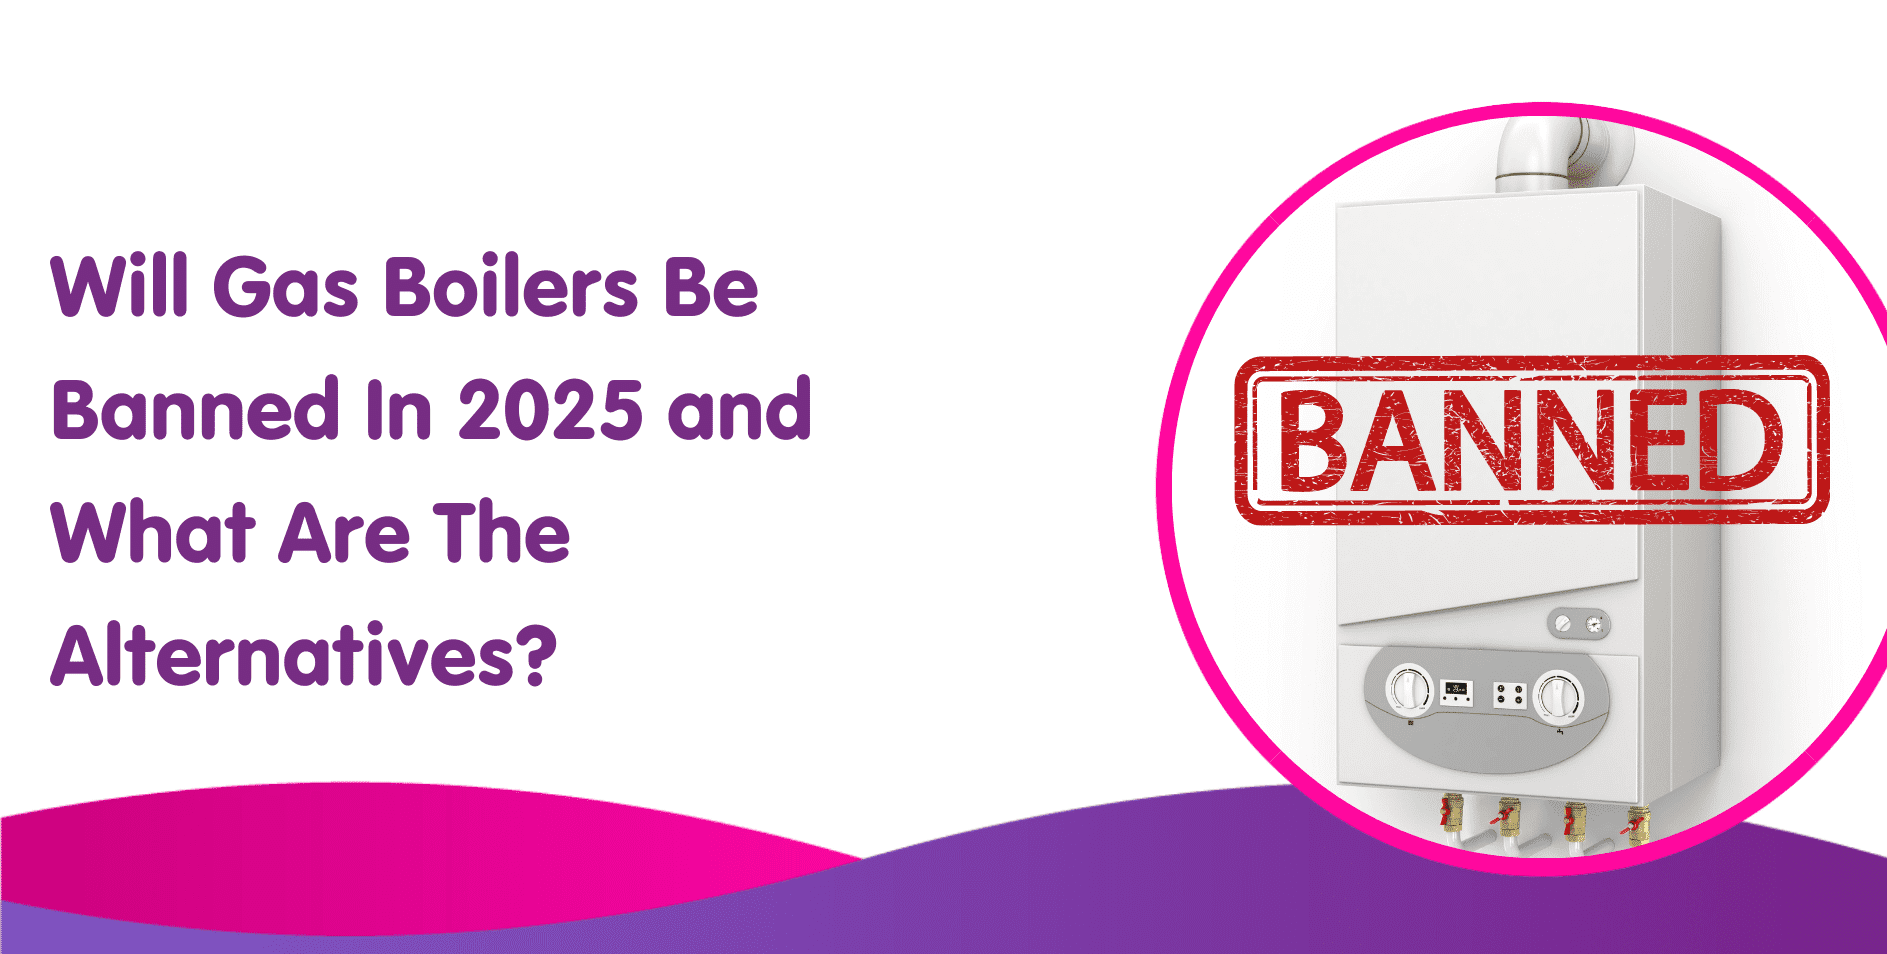 Will Gas Boilers Be Banned In 2025 and What Are The Alternatives